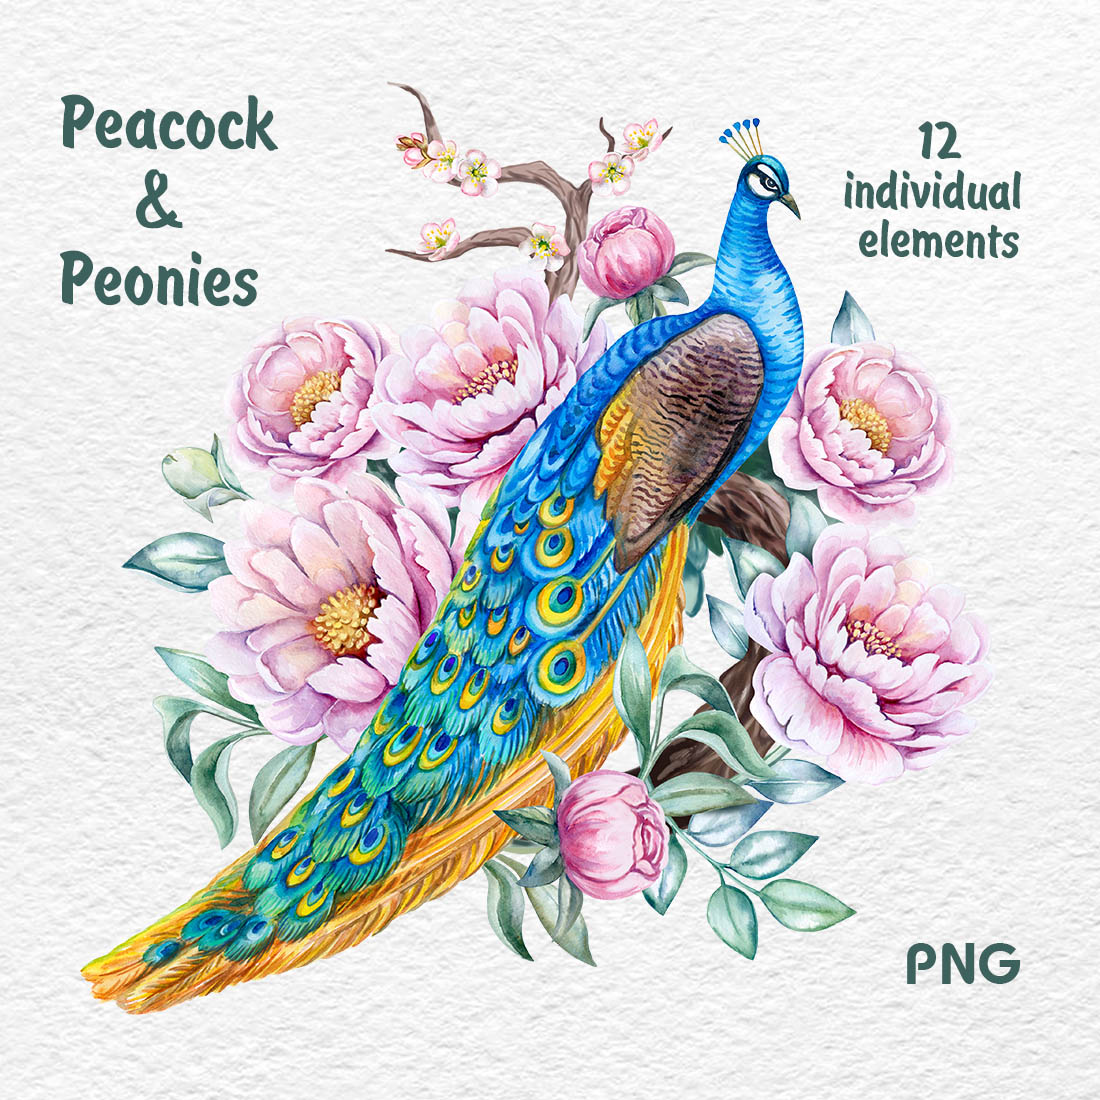 Peacock Pink Peonies Watercolor Clipart cover image.